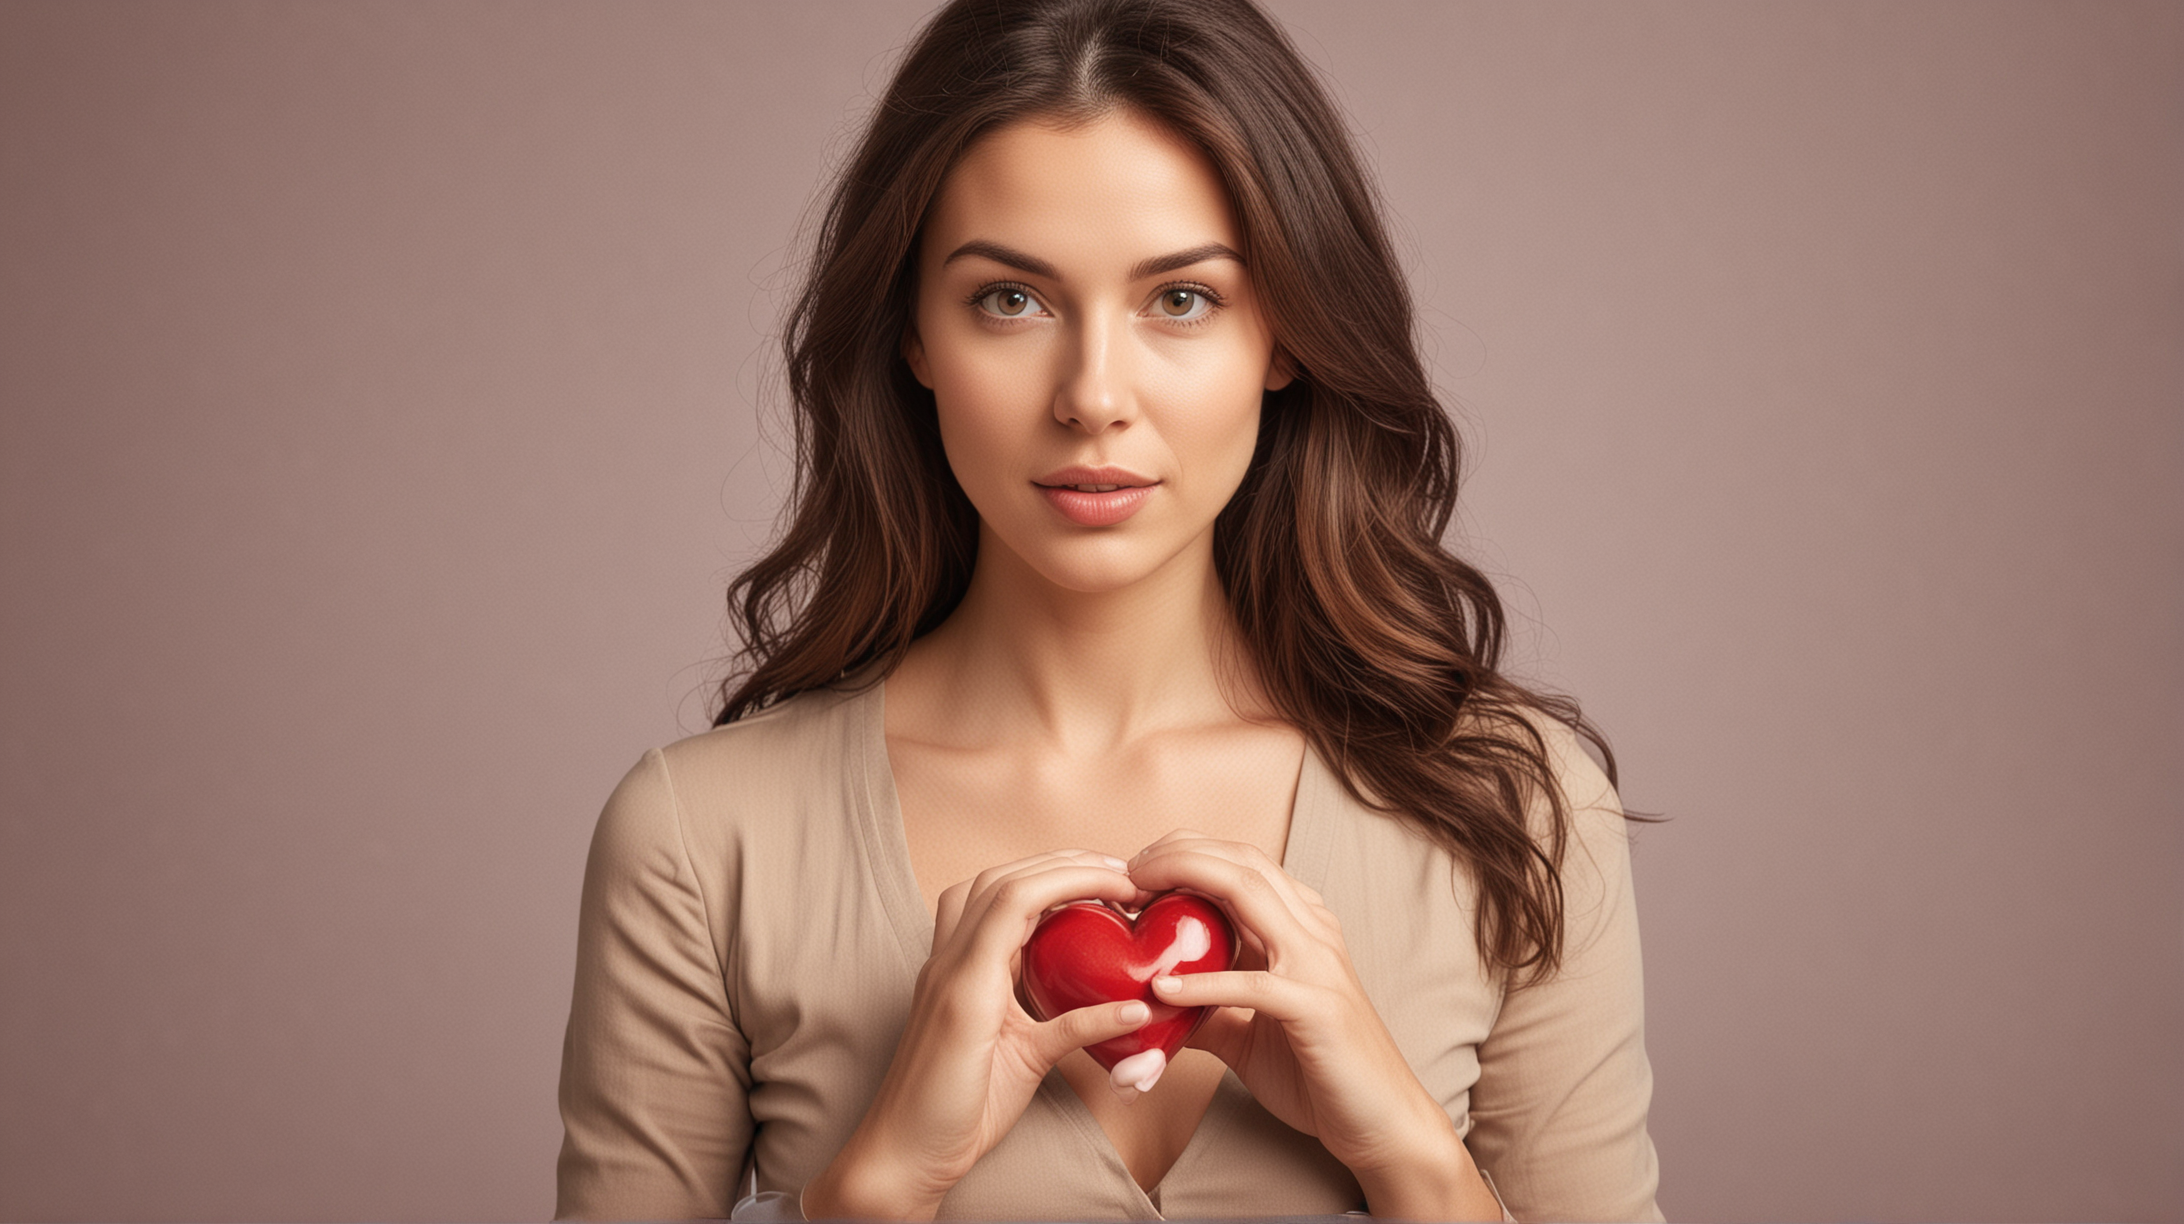 Woman Showing Heart Protection Symbolism